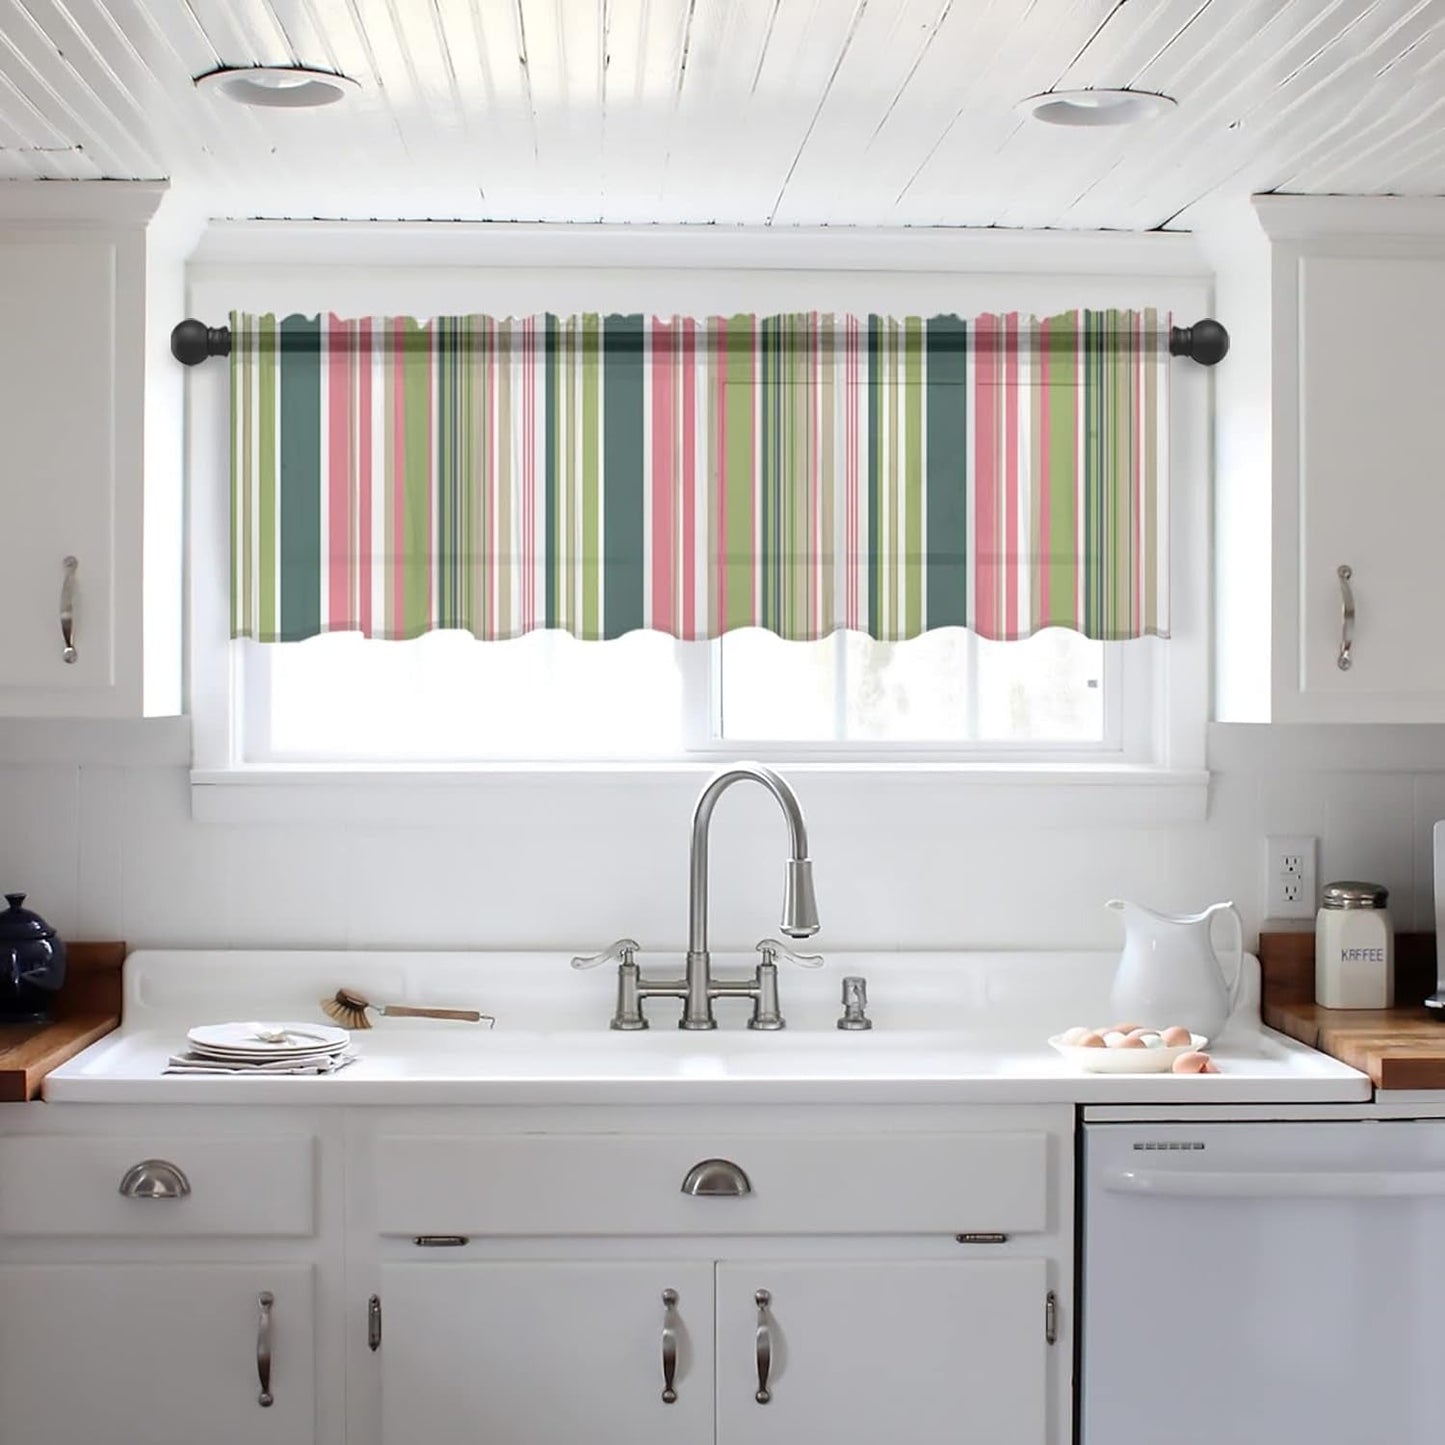 Chiffon Window Valance Kitchen Curtains Pink White Sage Green Vertical Stripe,Rod Pocket Tier Curtain Light Filter Panel,Color Straight Lines Windows Valances Drapes for Bedroom,Bathroom 54X18In